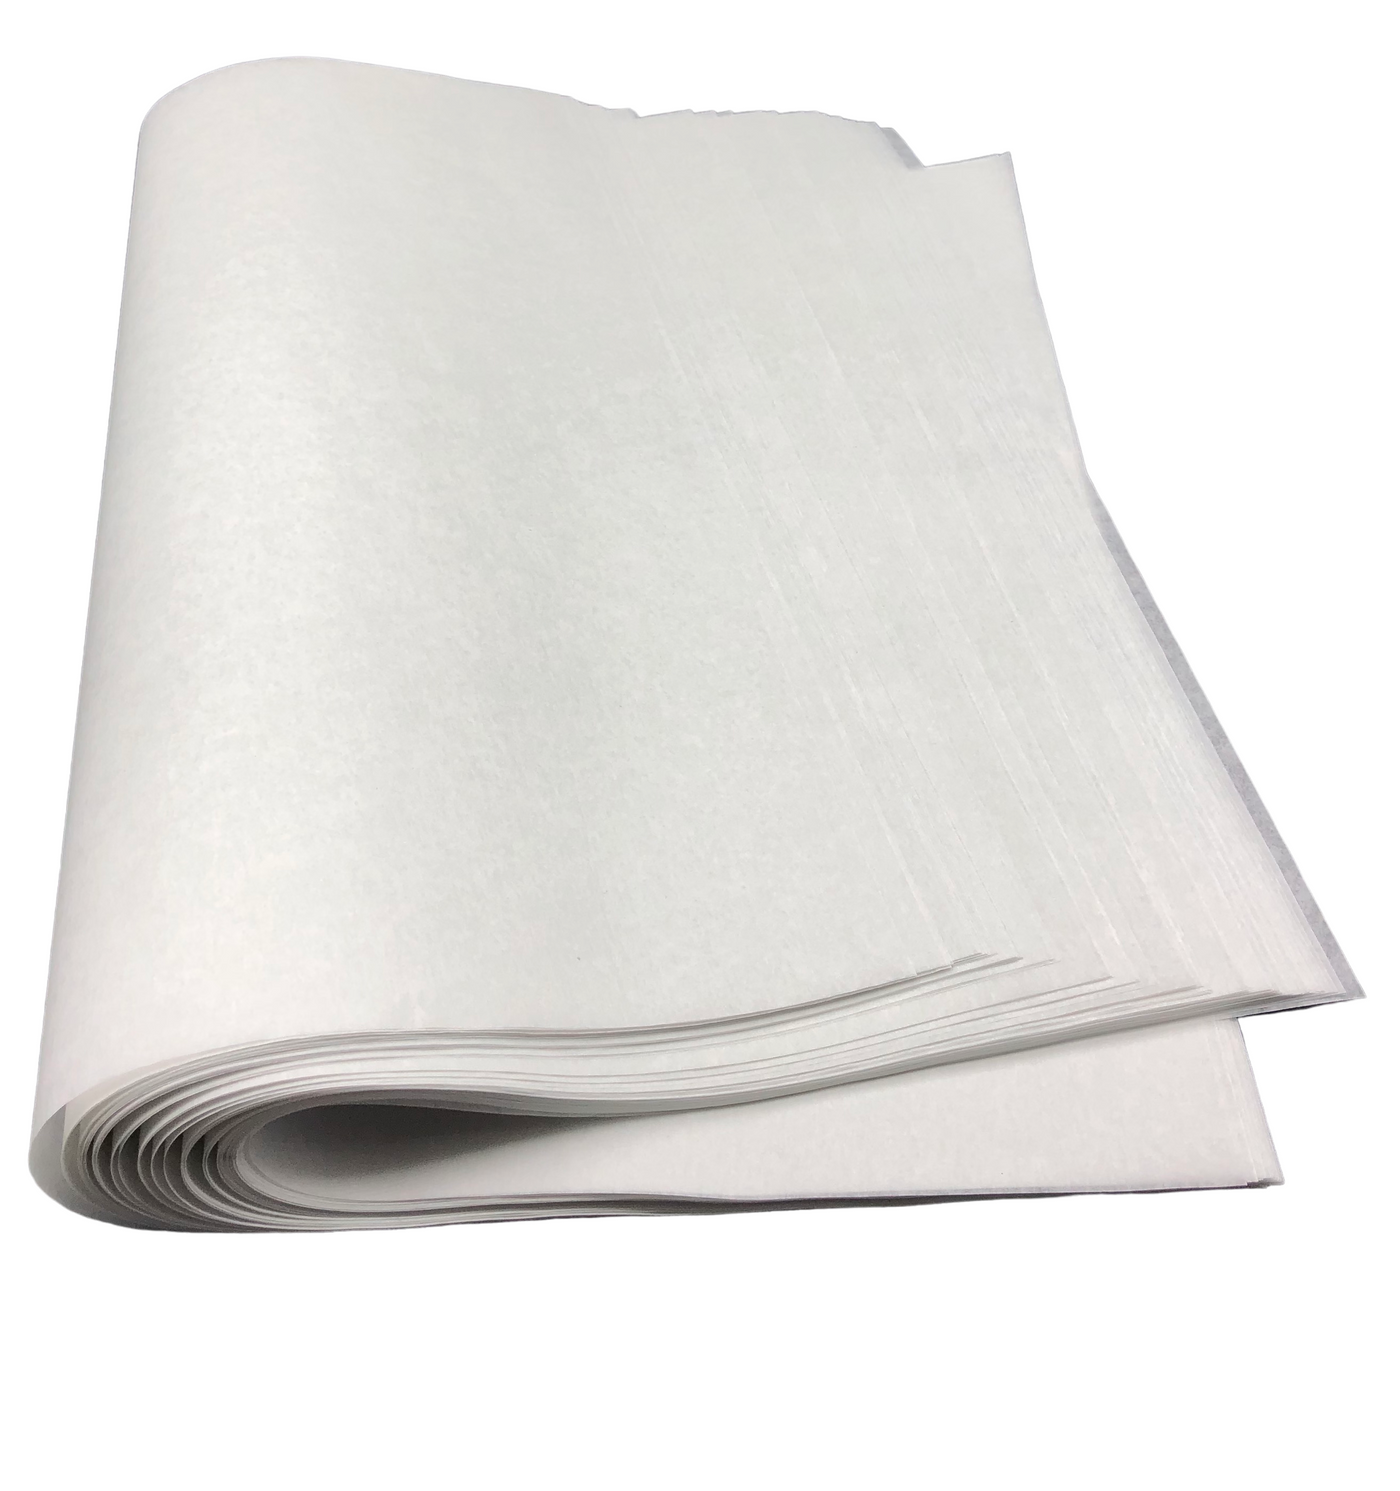 200 Butter Paper Sheets of 7.5x9.5 inch parchment baking paper